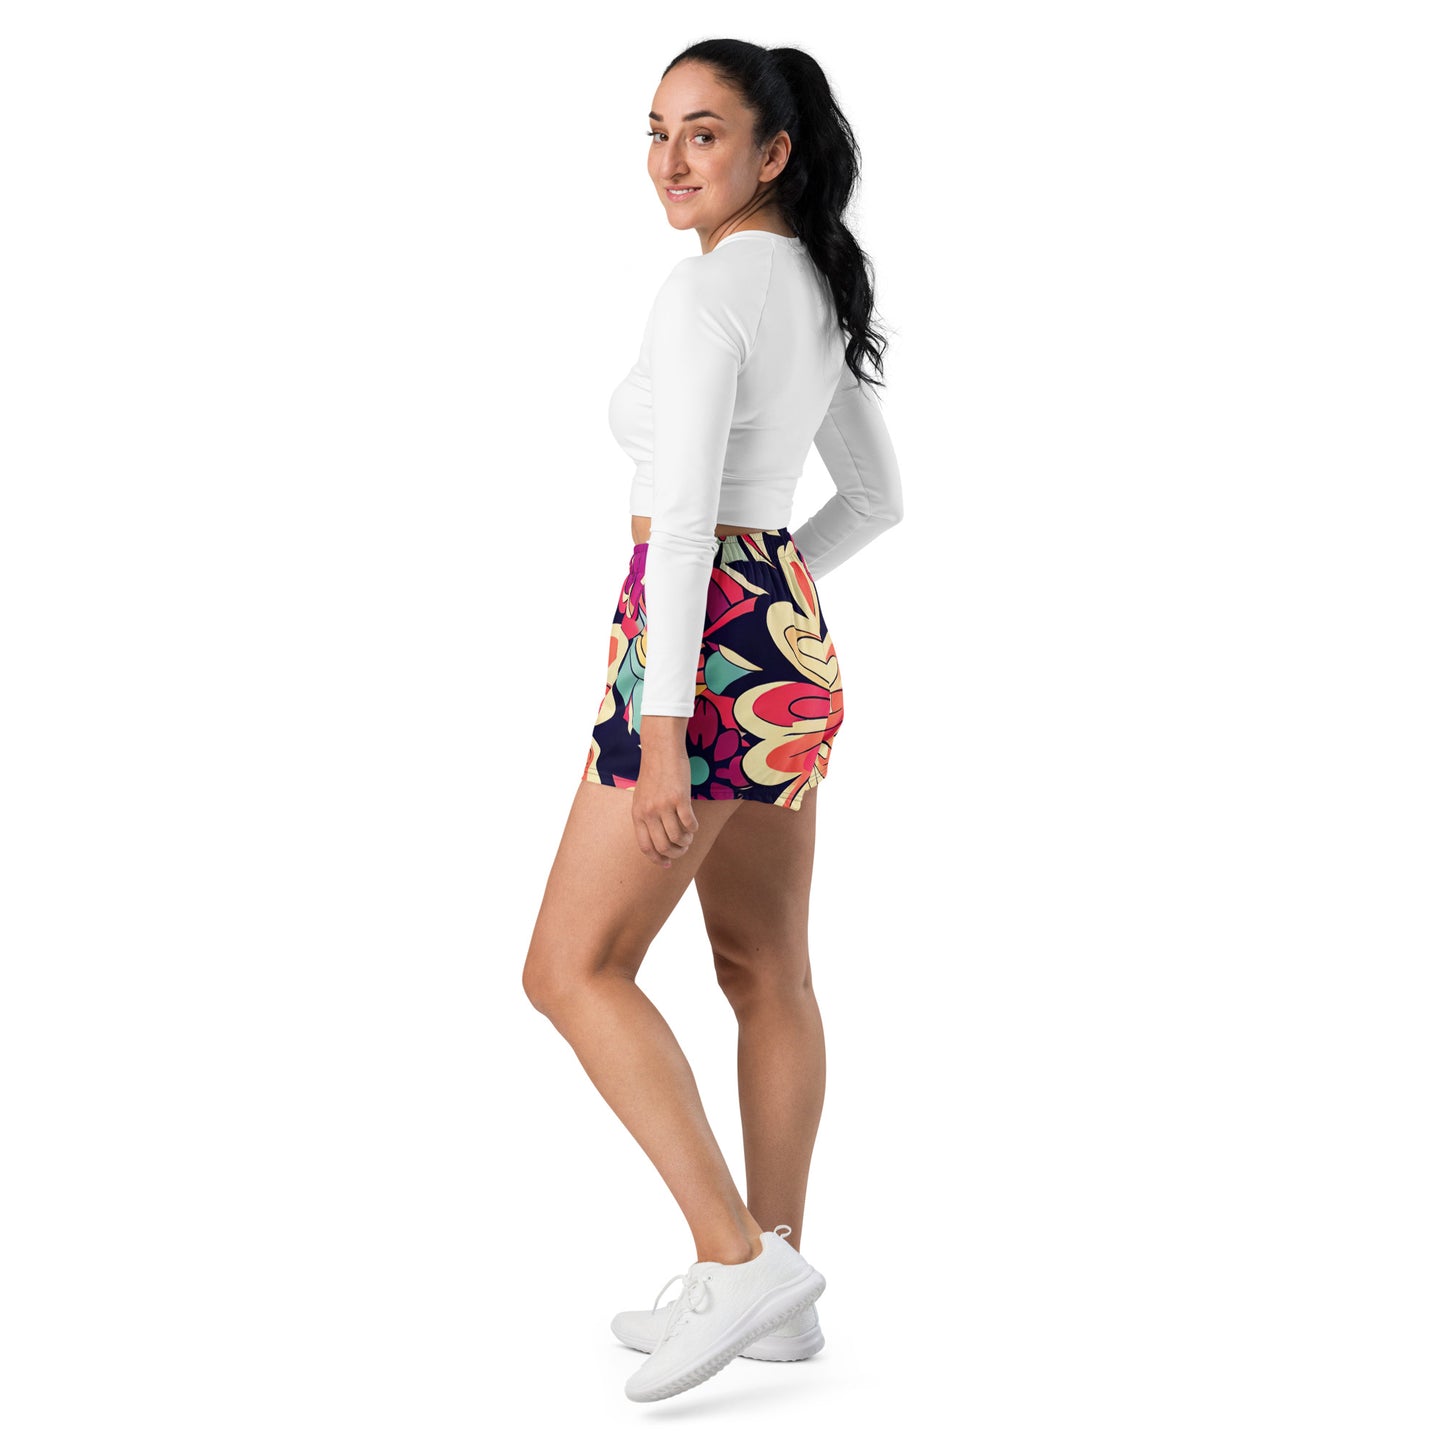 DMV 1525 Floral Women’s Recycled Athletic Shorts